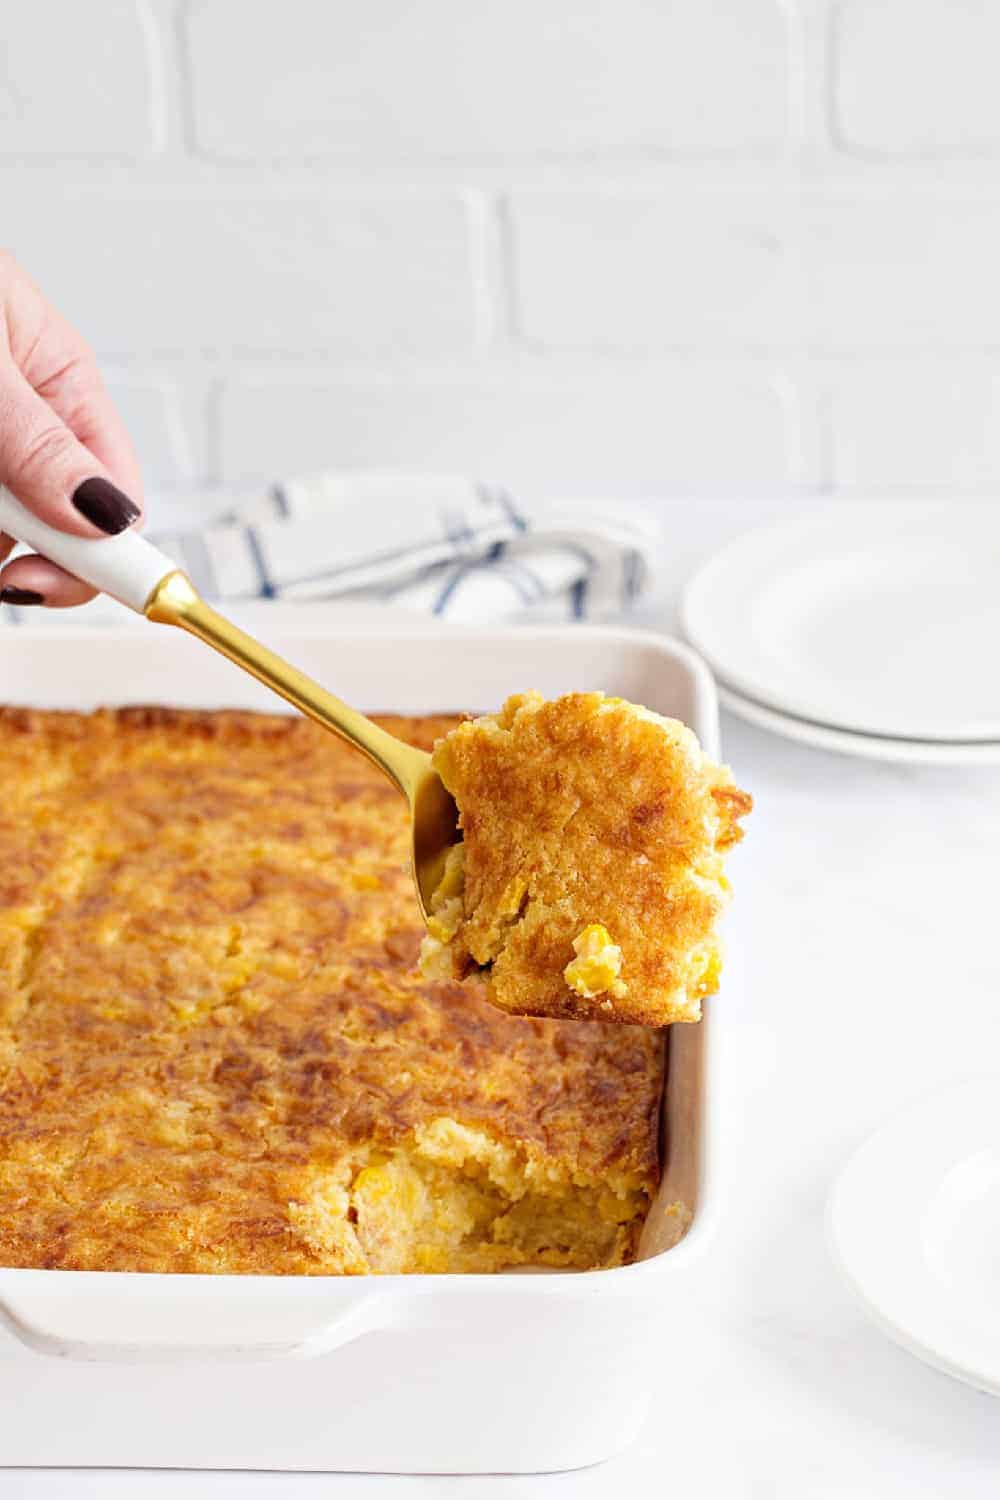 Easy Corn Casserole is a must-make addition to any holiday table.